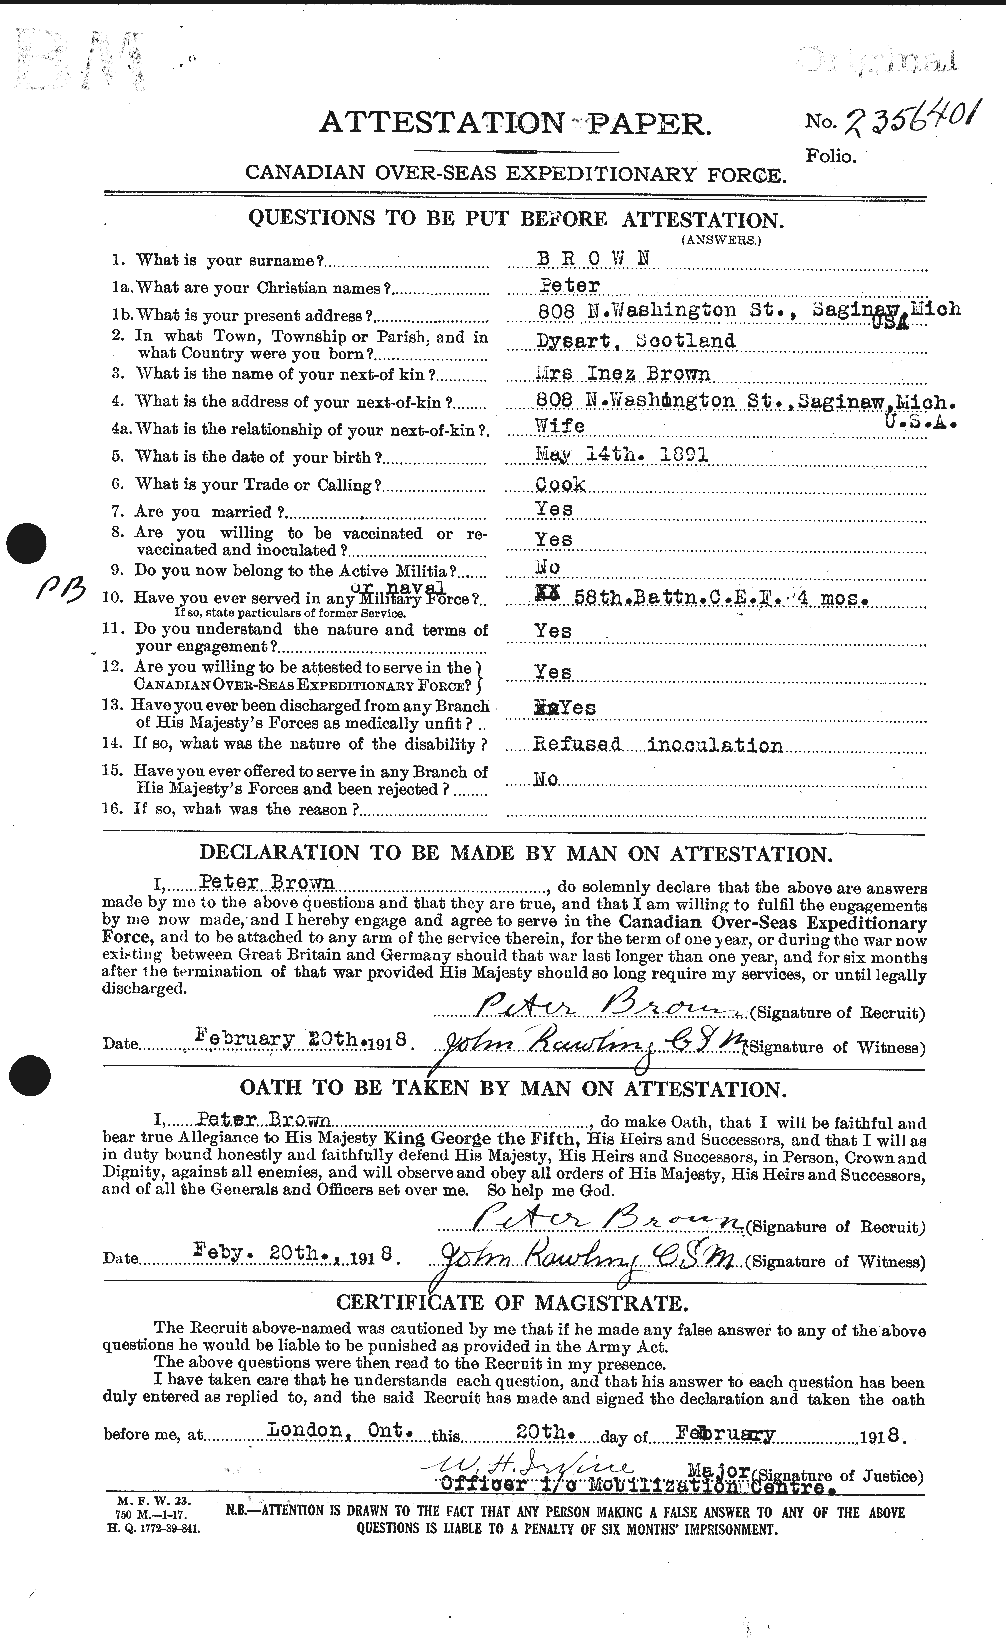 Personnel Records of the First World War - CEF 267198a